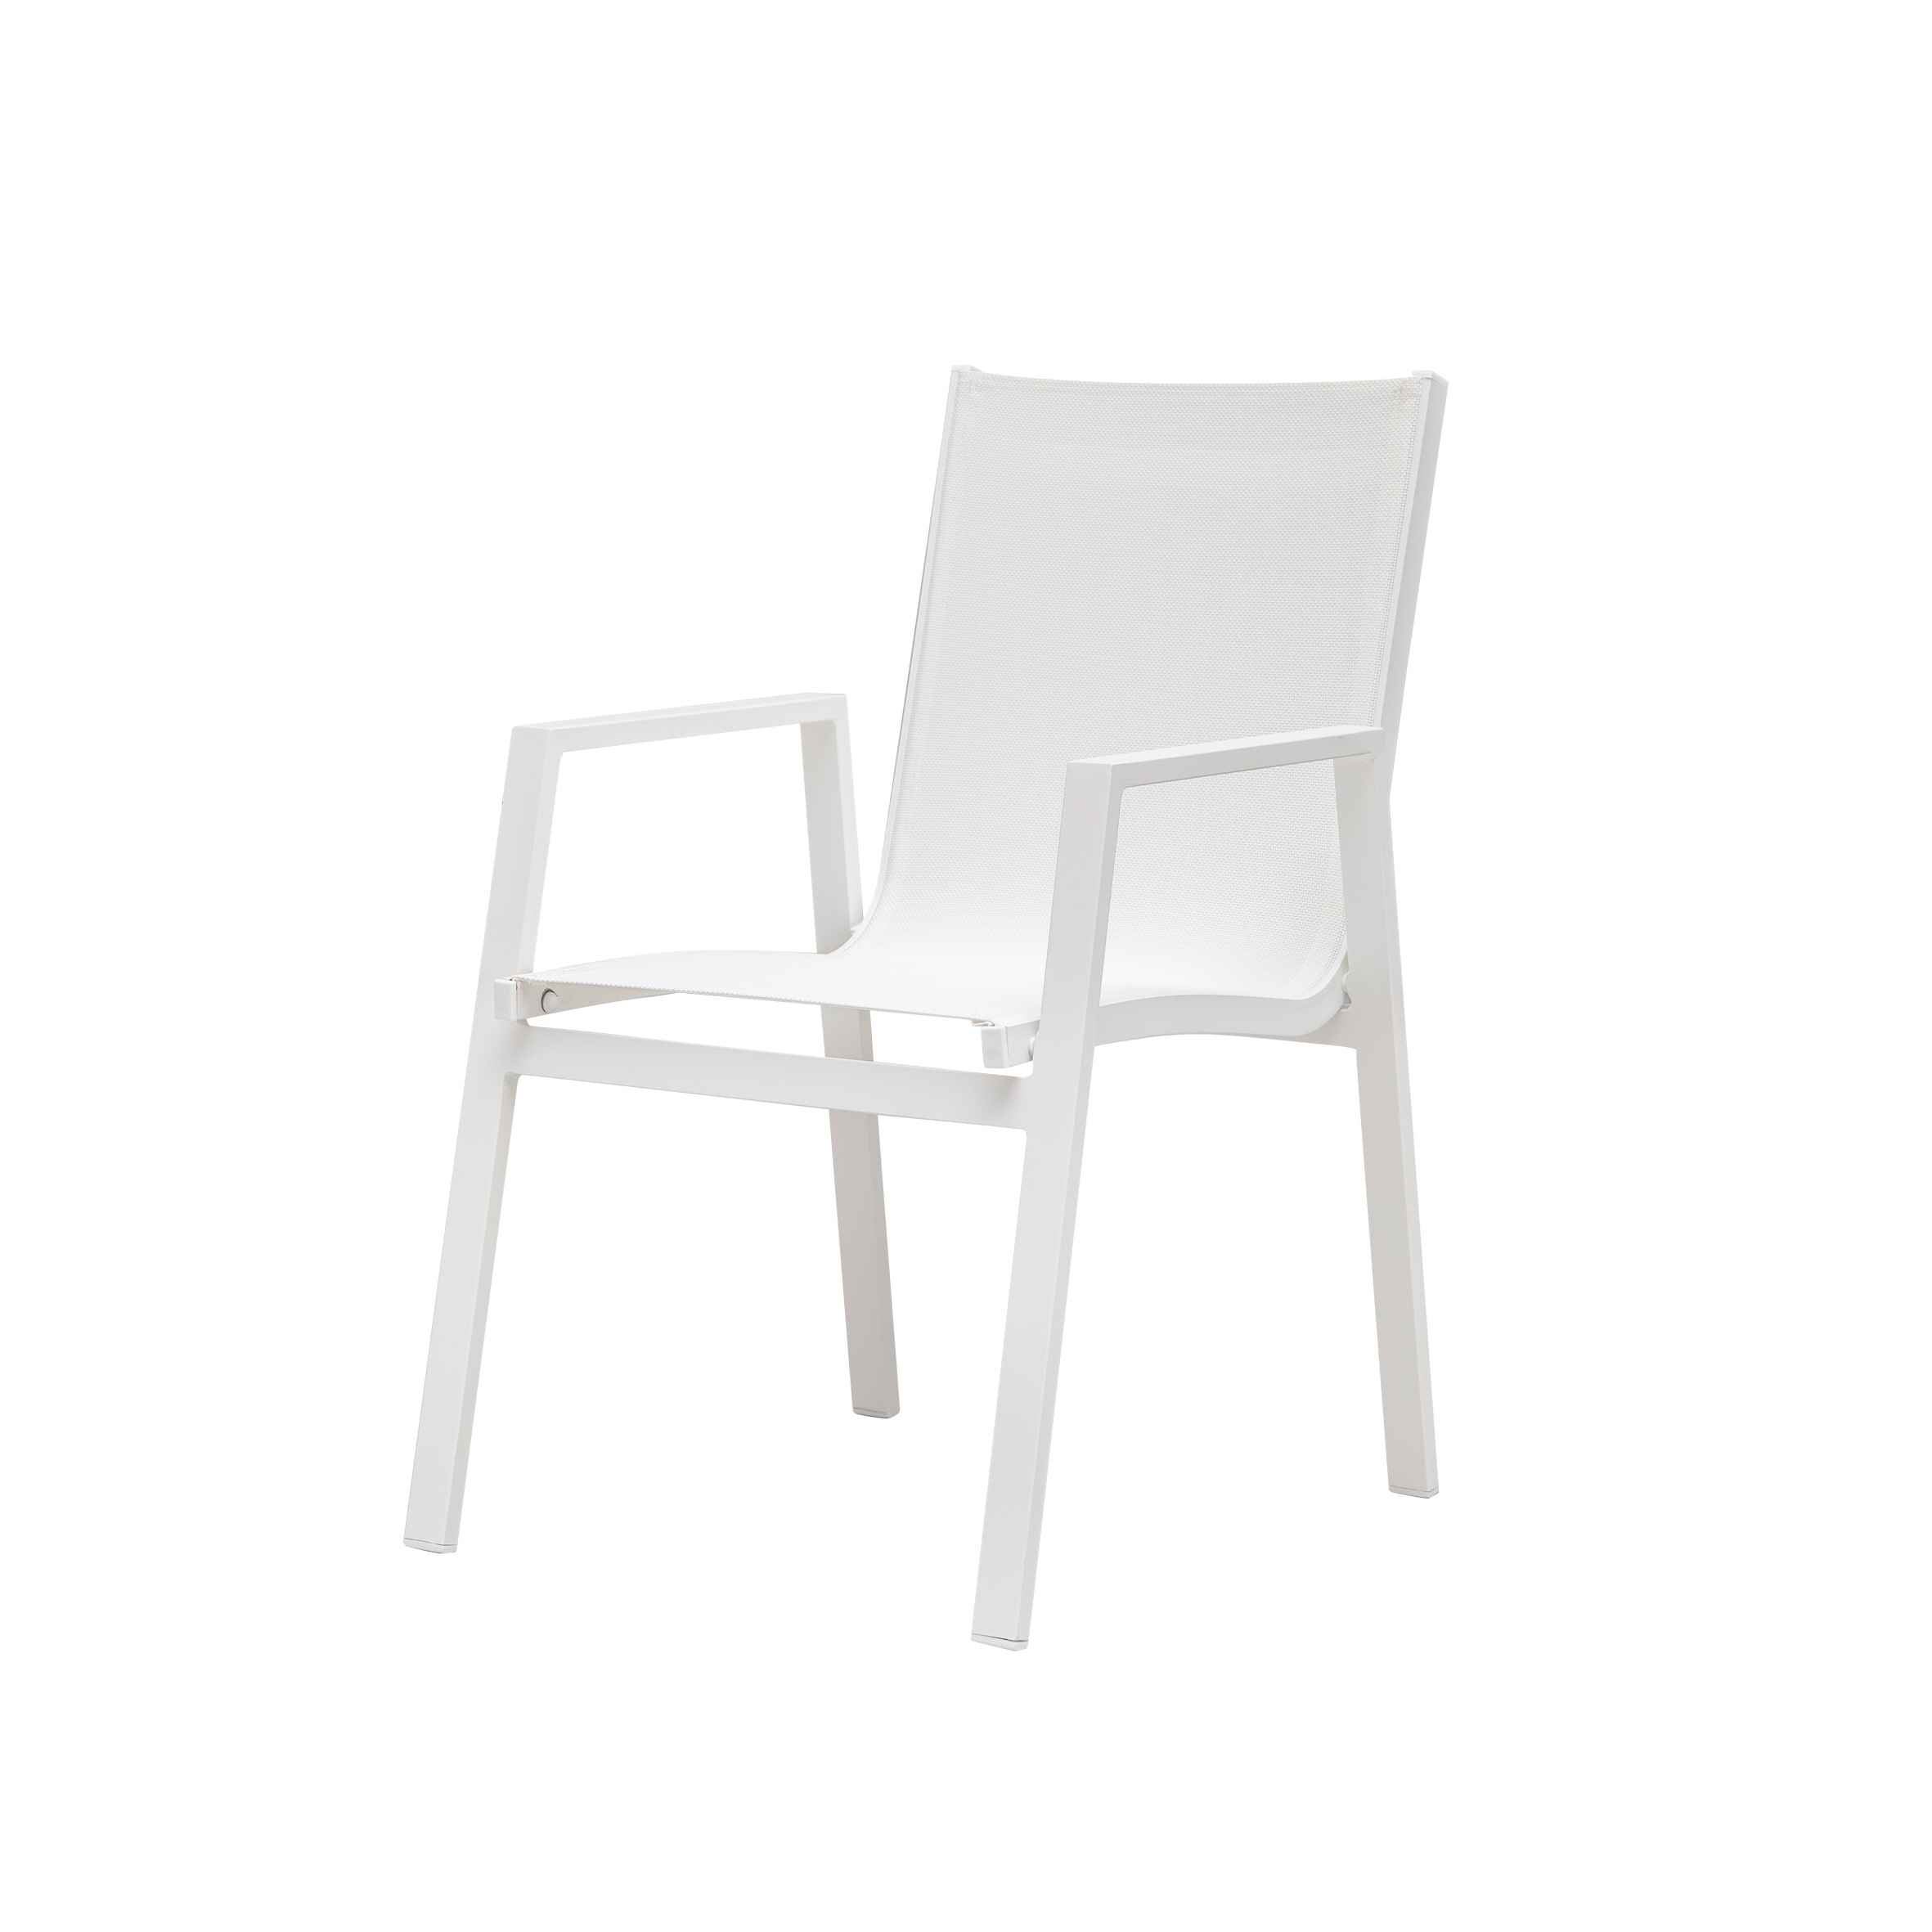 Snow white textile dining chair S1